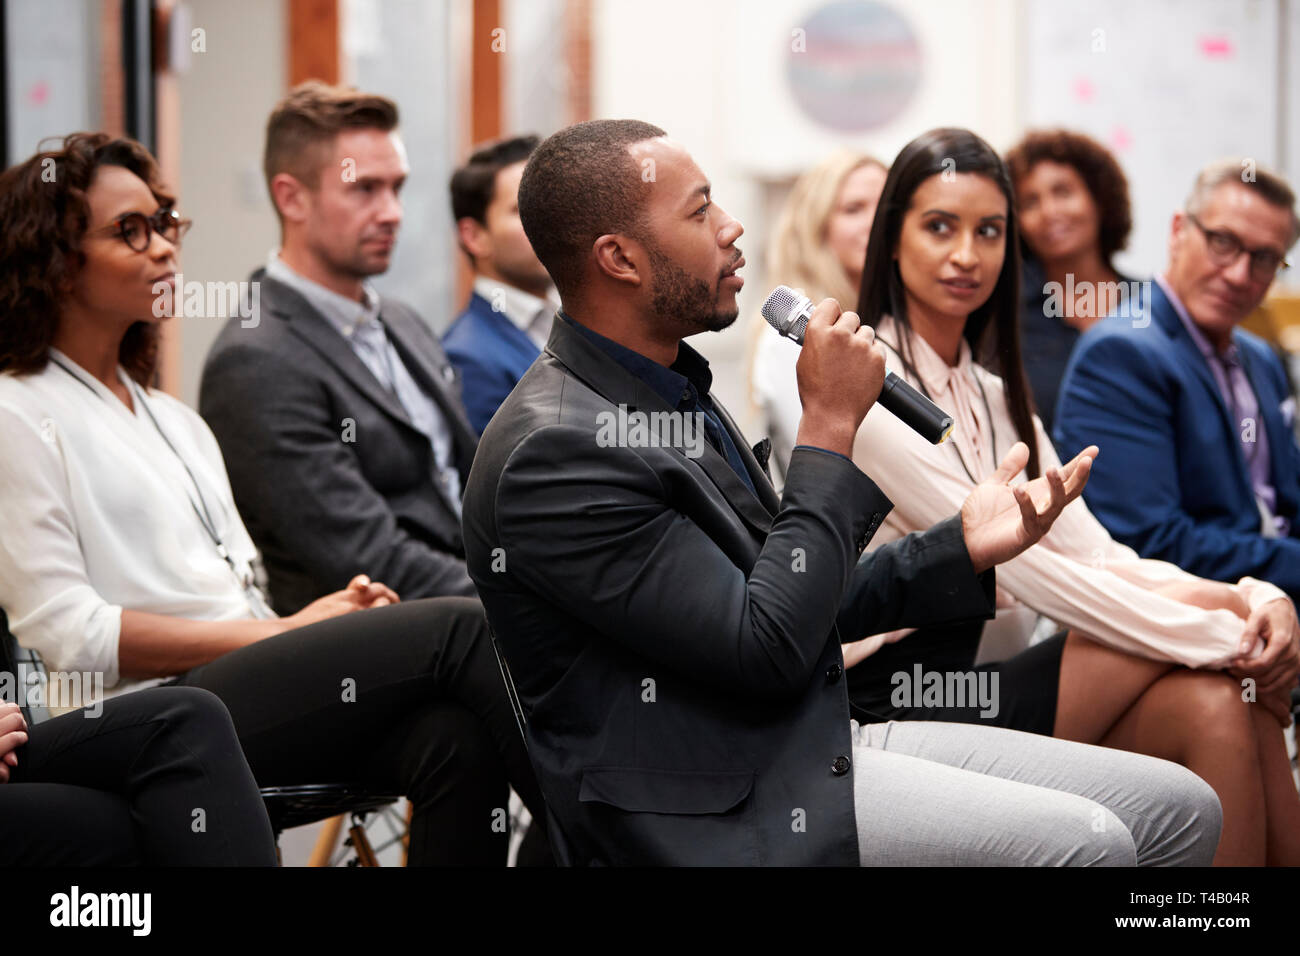 Group Of Businessmen And Businesswomen Applauding Presentation At Conference Stock Photo